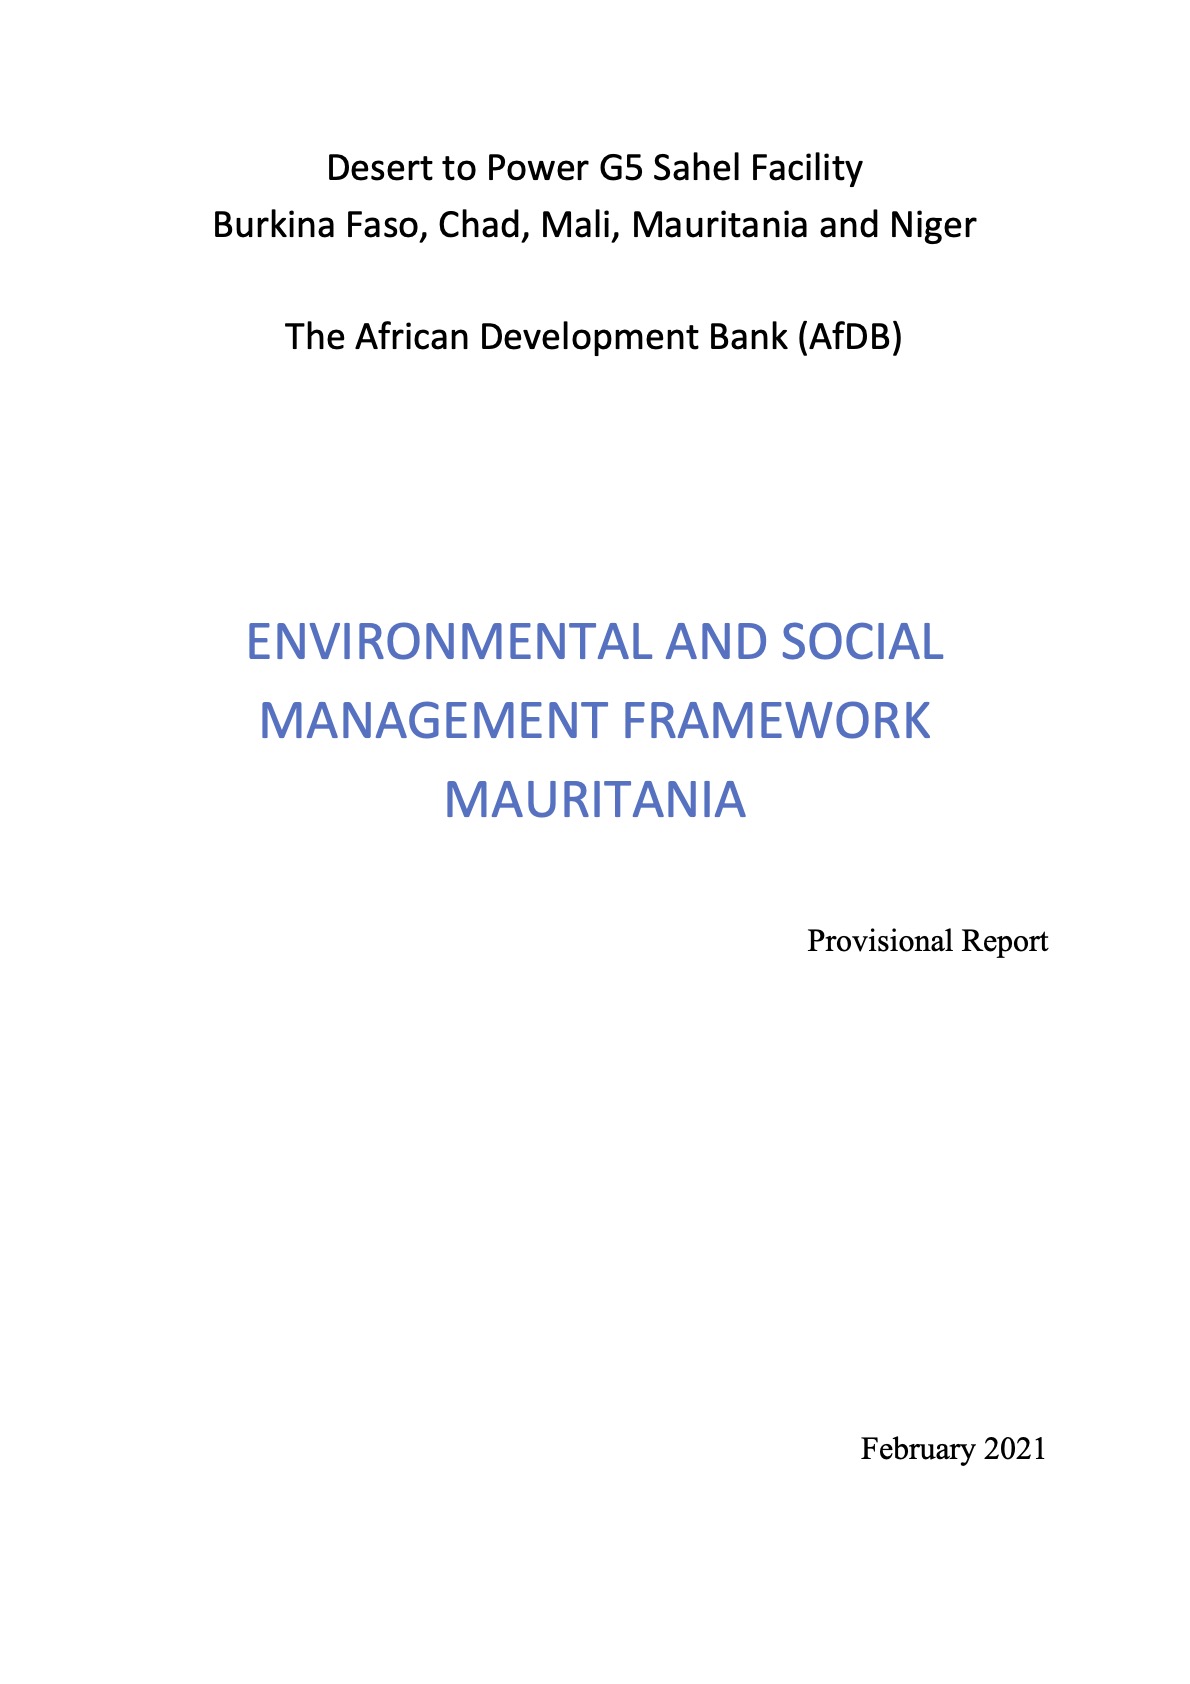 Document cover for Environmental and social safeguards (ESS) report for the programme - Desert to Power Financing Facility for the G5 Sahel Countries – submitted by AfDB